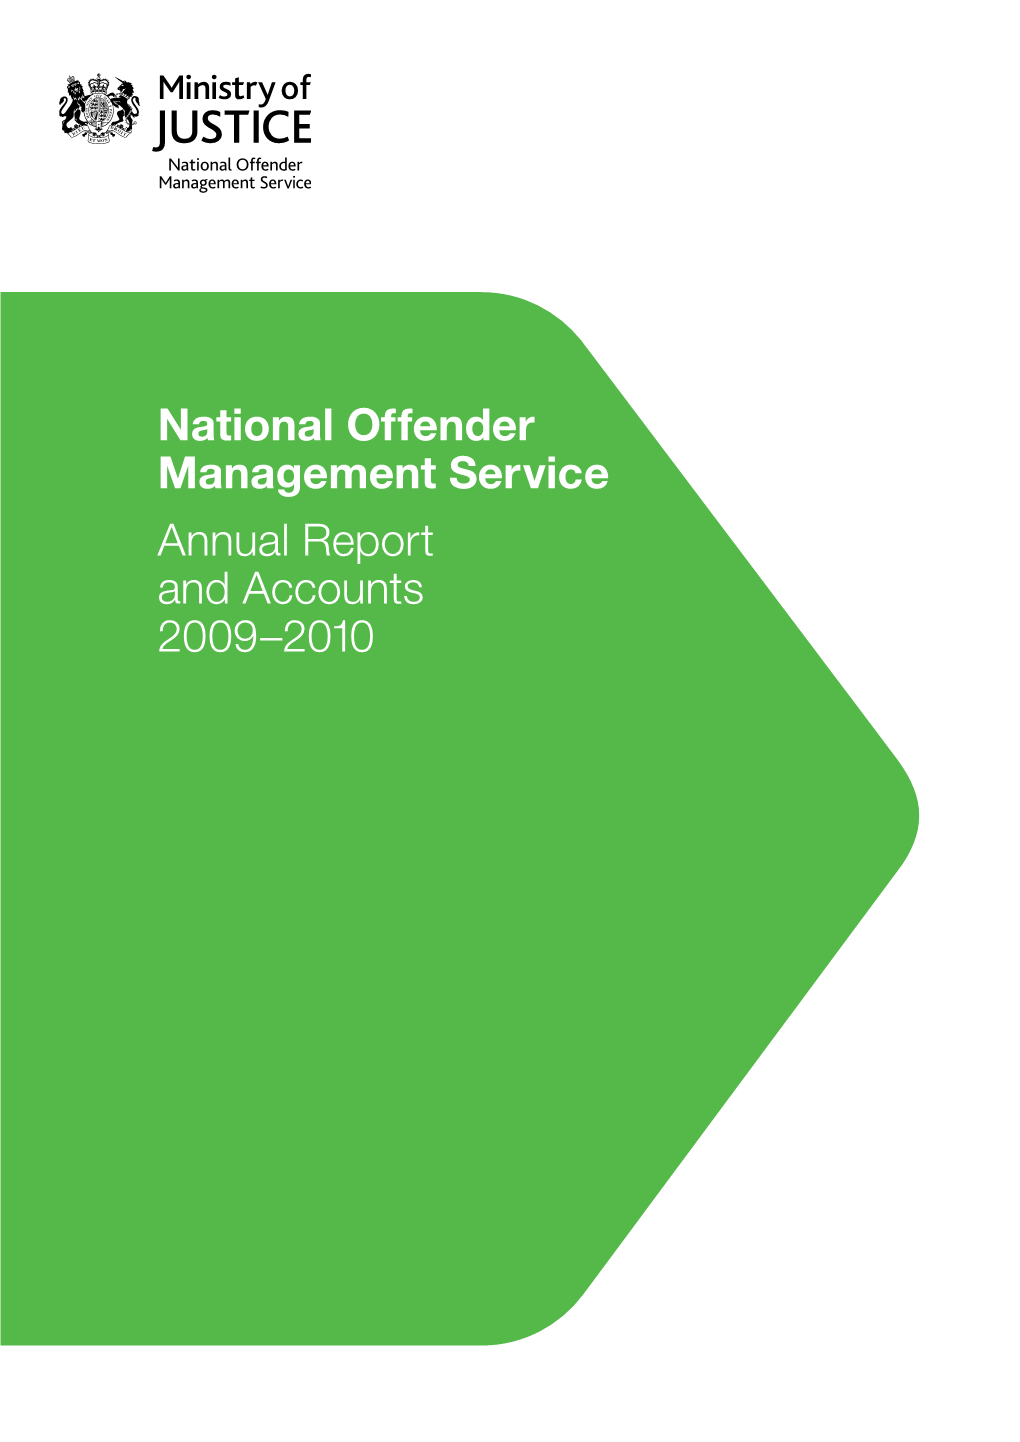 National Offender Management Service Annual Report 2009-2010